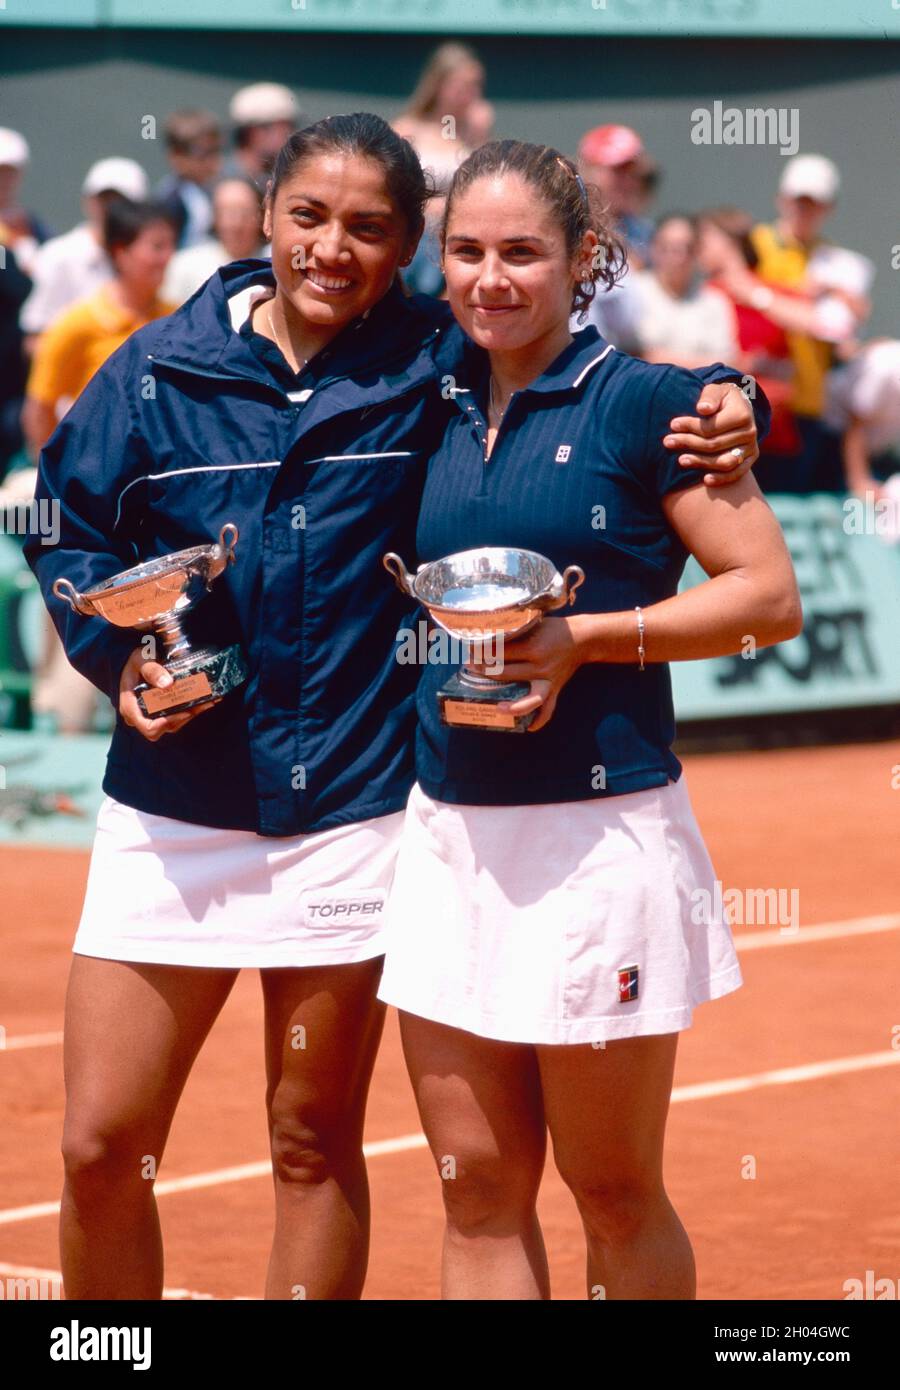 Argentinian tennis player Paola Suarez and Spanish tennis player Virginia Ruano Pascual win the women's double at Roland Garros, France 2001 Stock Photo